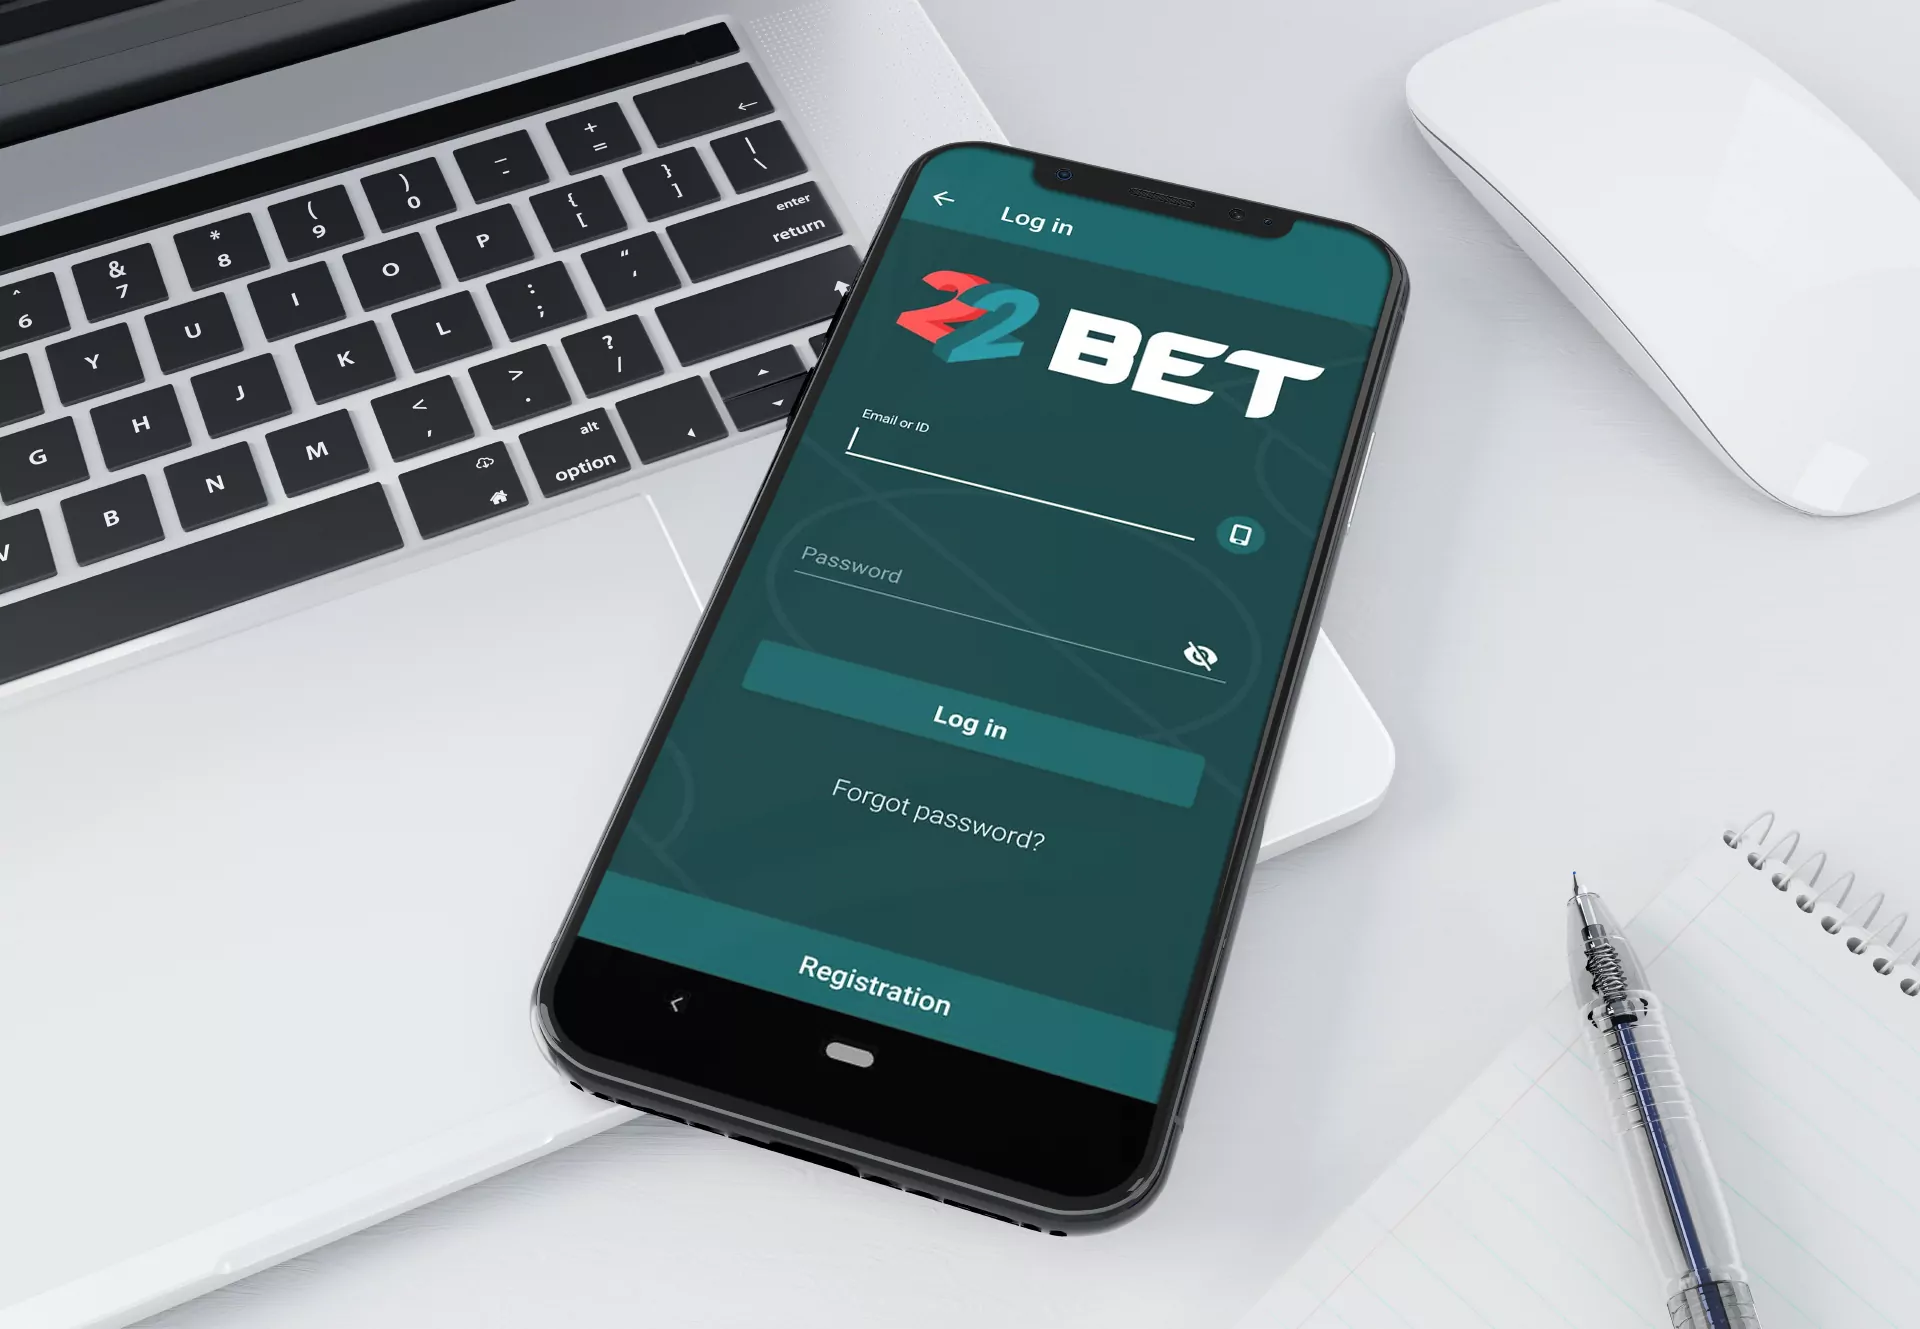 In the 22bet you find the biggest number of disciplines to bet on.